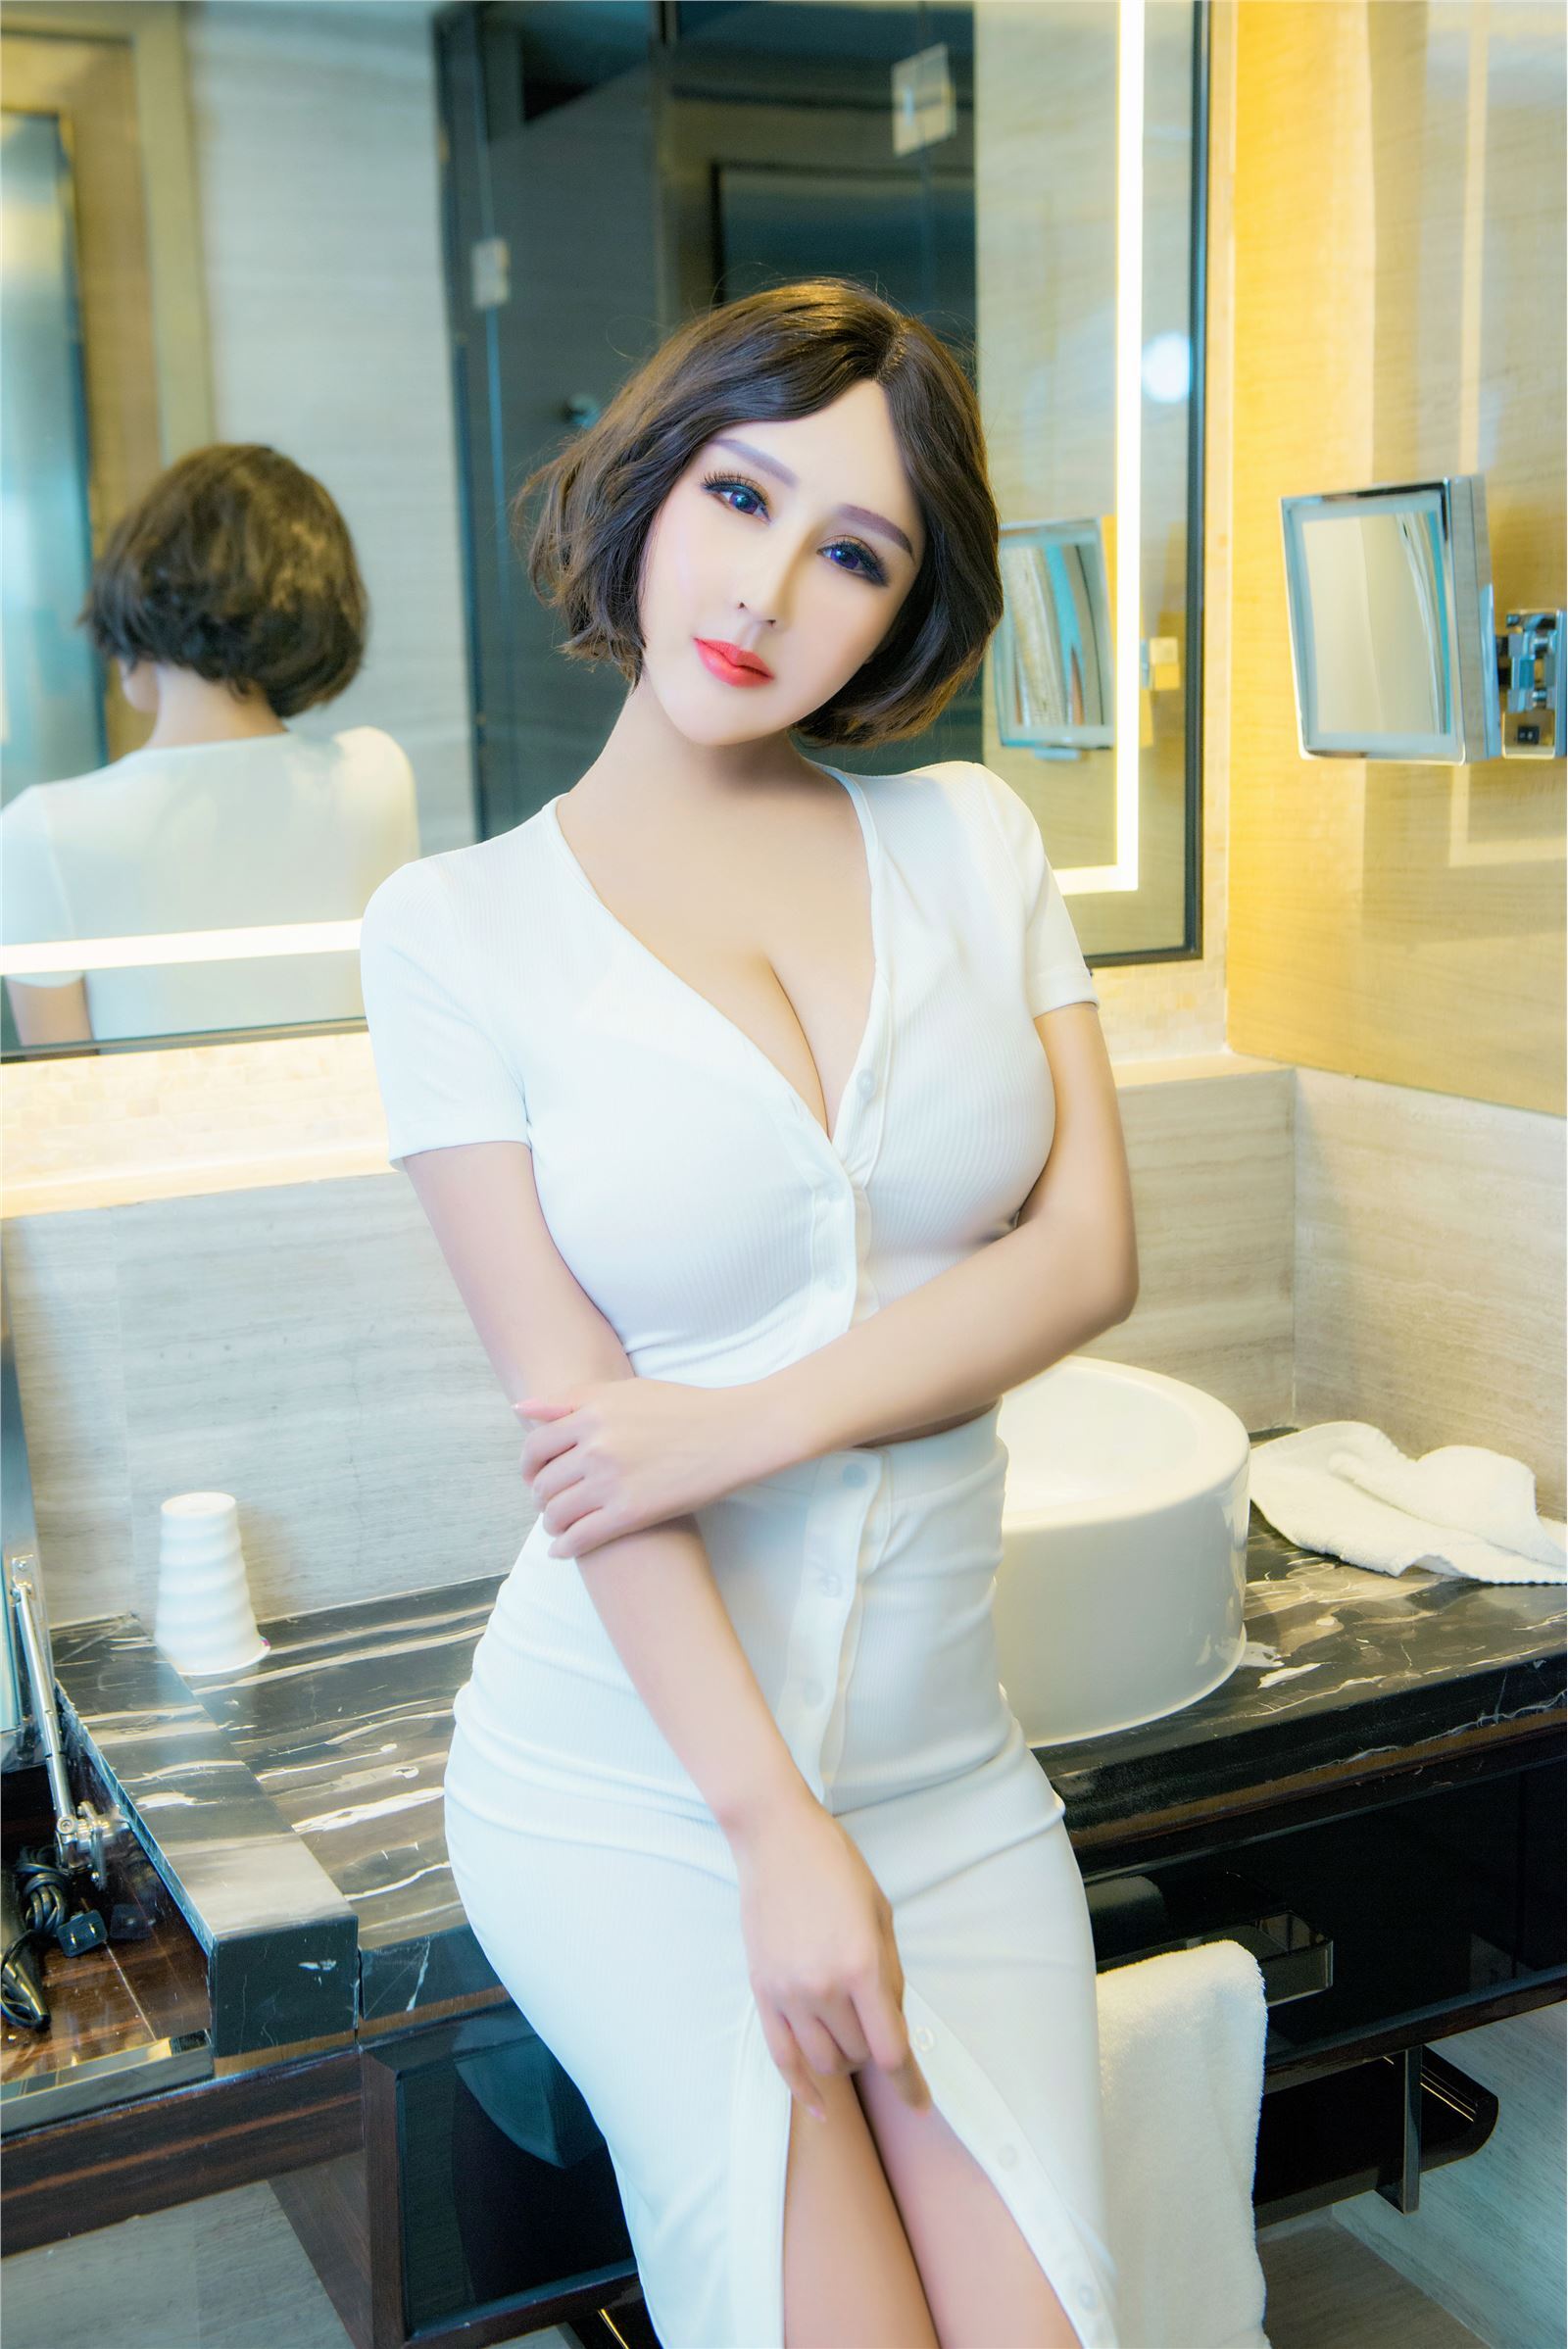 [slady hunting goddess] 2017.05.31 no.012 SEXY G milk Na Yi Ling Er breast beauty buttocks private room Na Yi Ling Er Part II